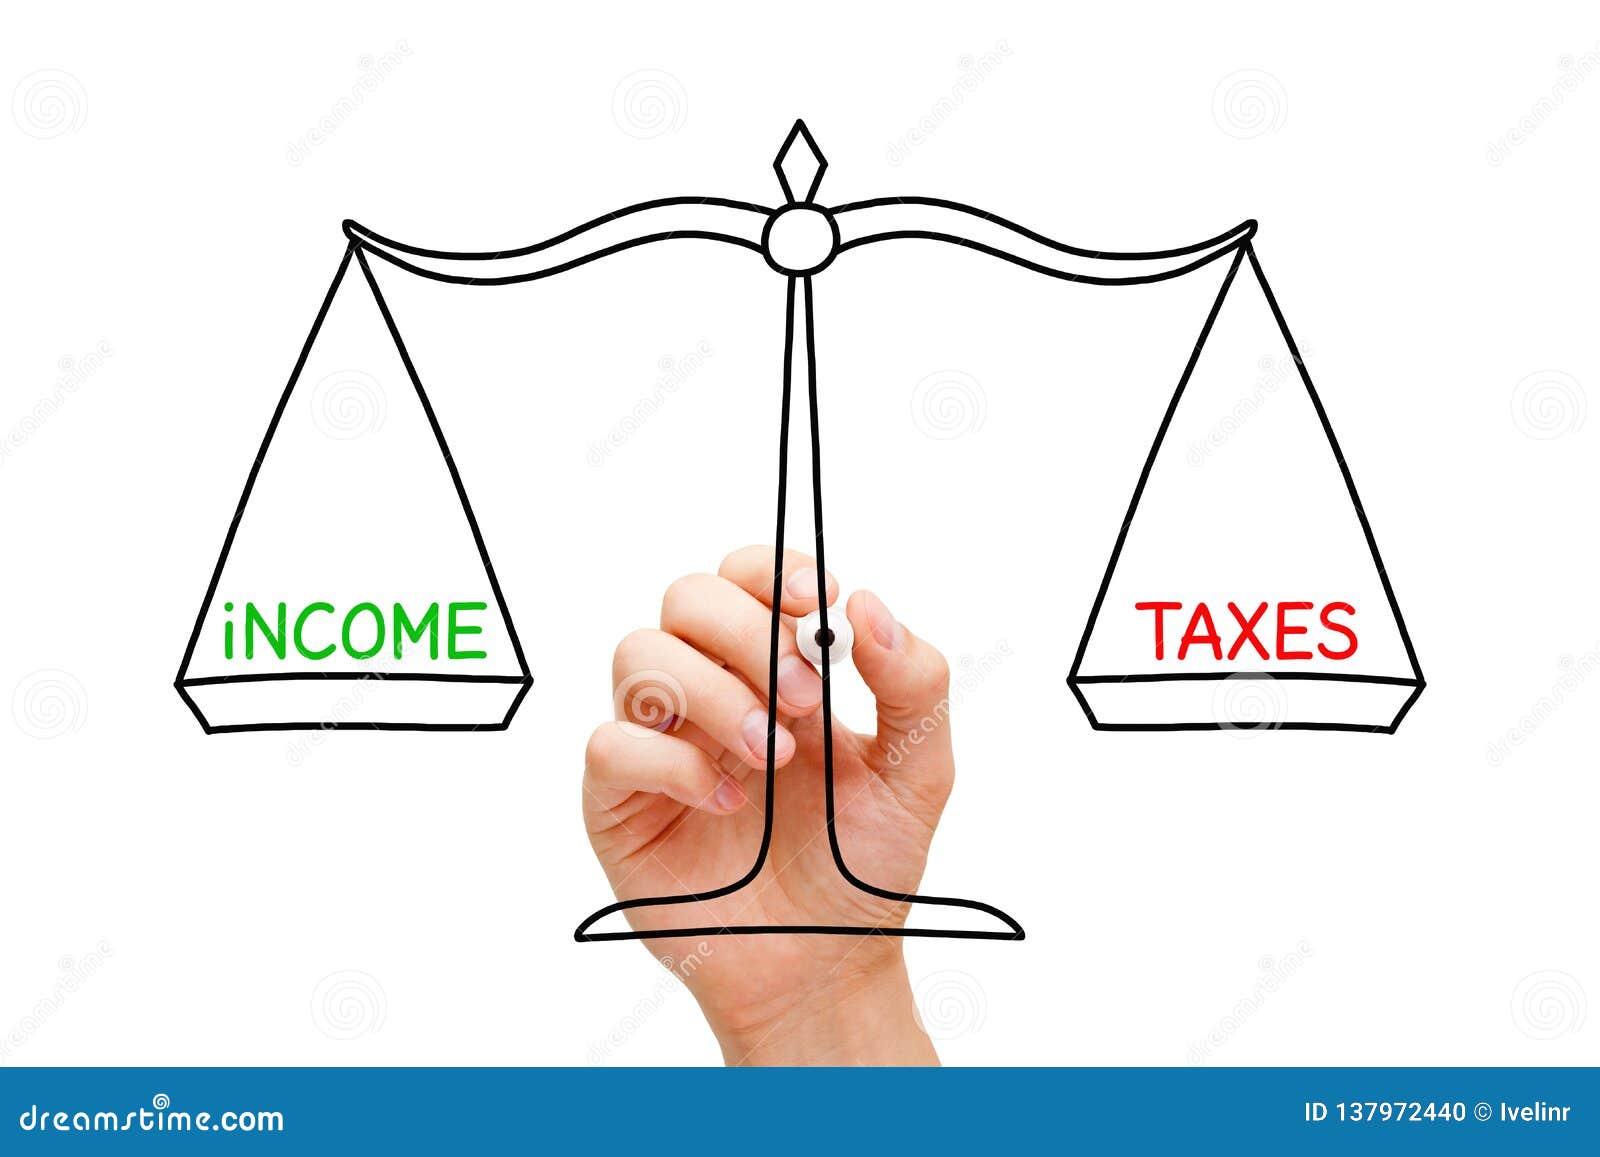 Legal Grind®'s The Little Law Book - Individual Income Taxes